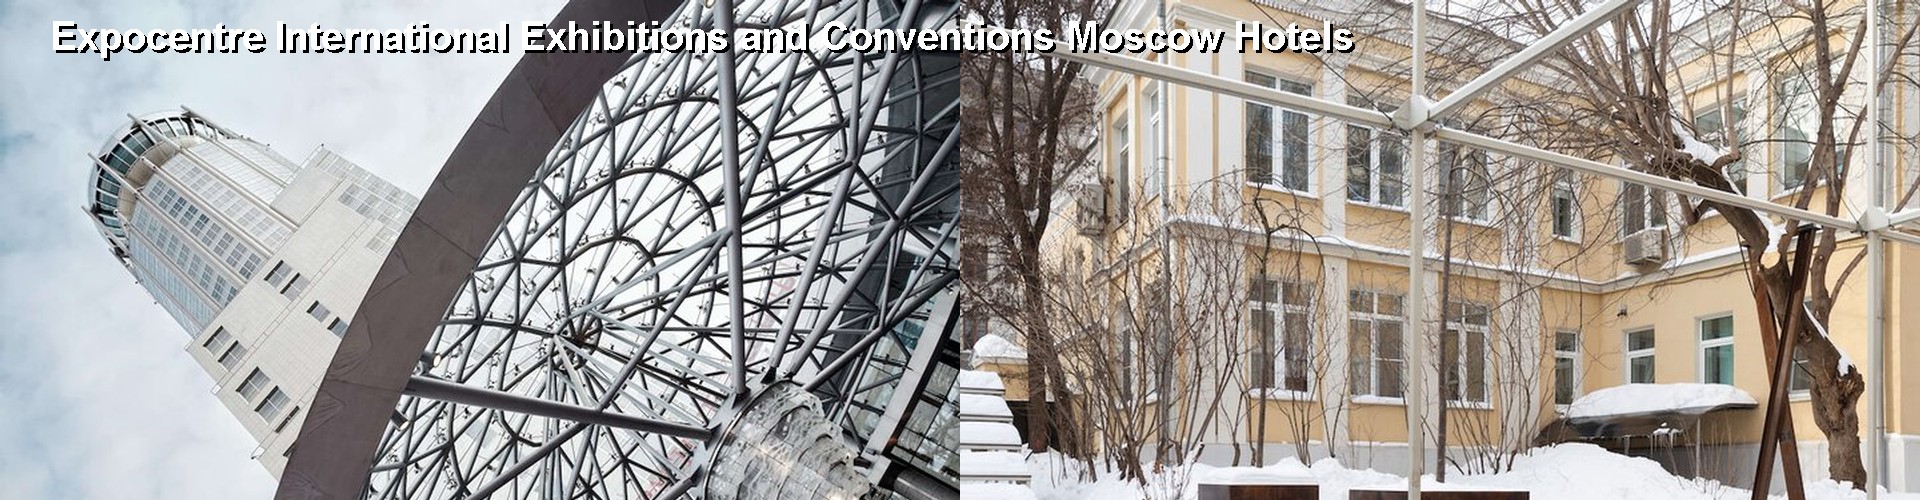 5 Best Hotels near Expocentre International Exhibitions and Conventions Moscow